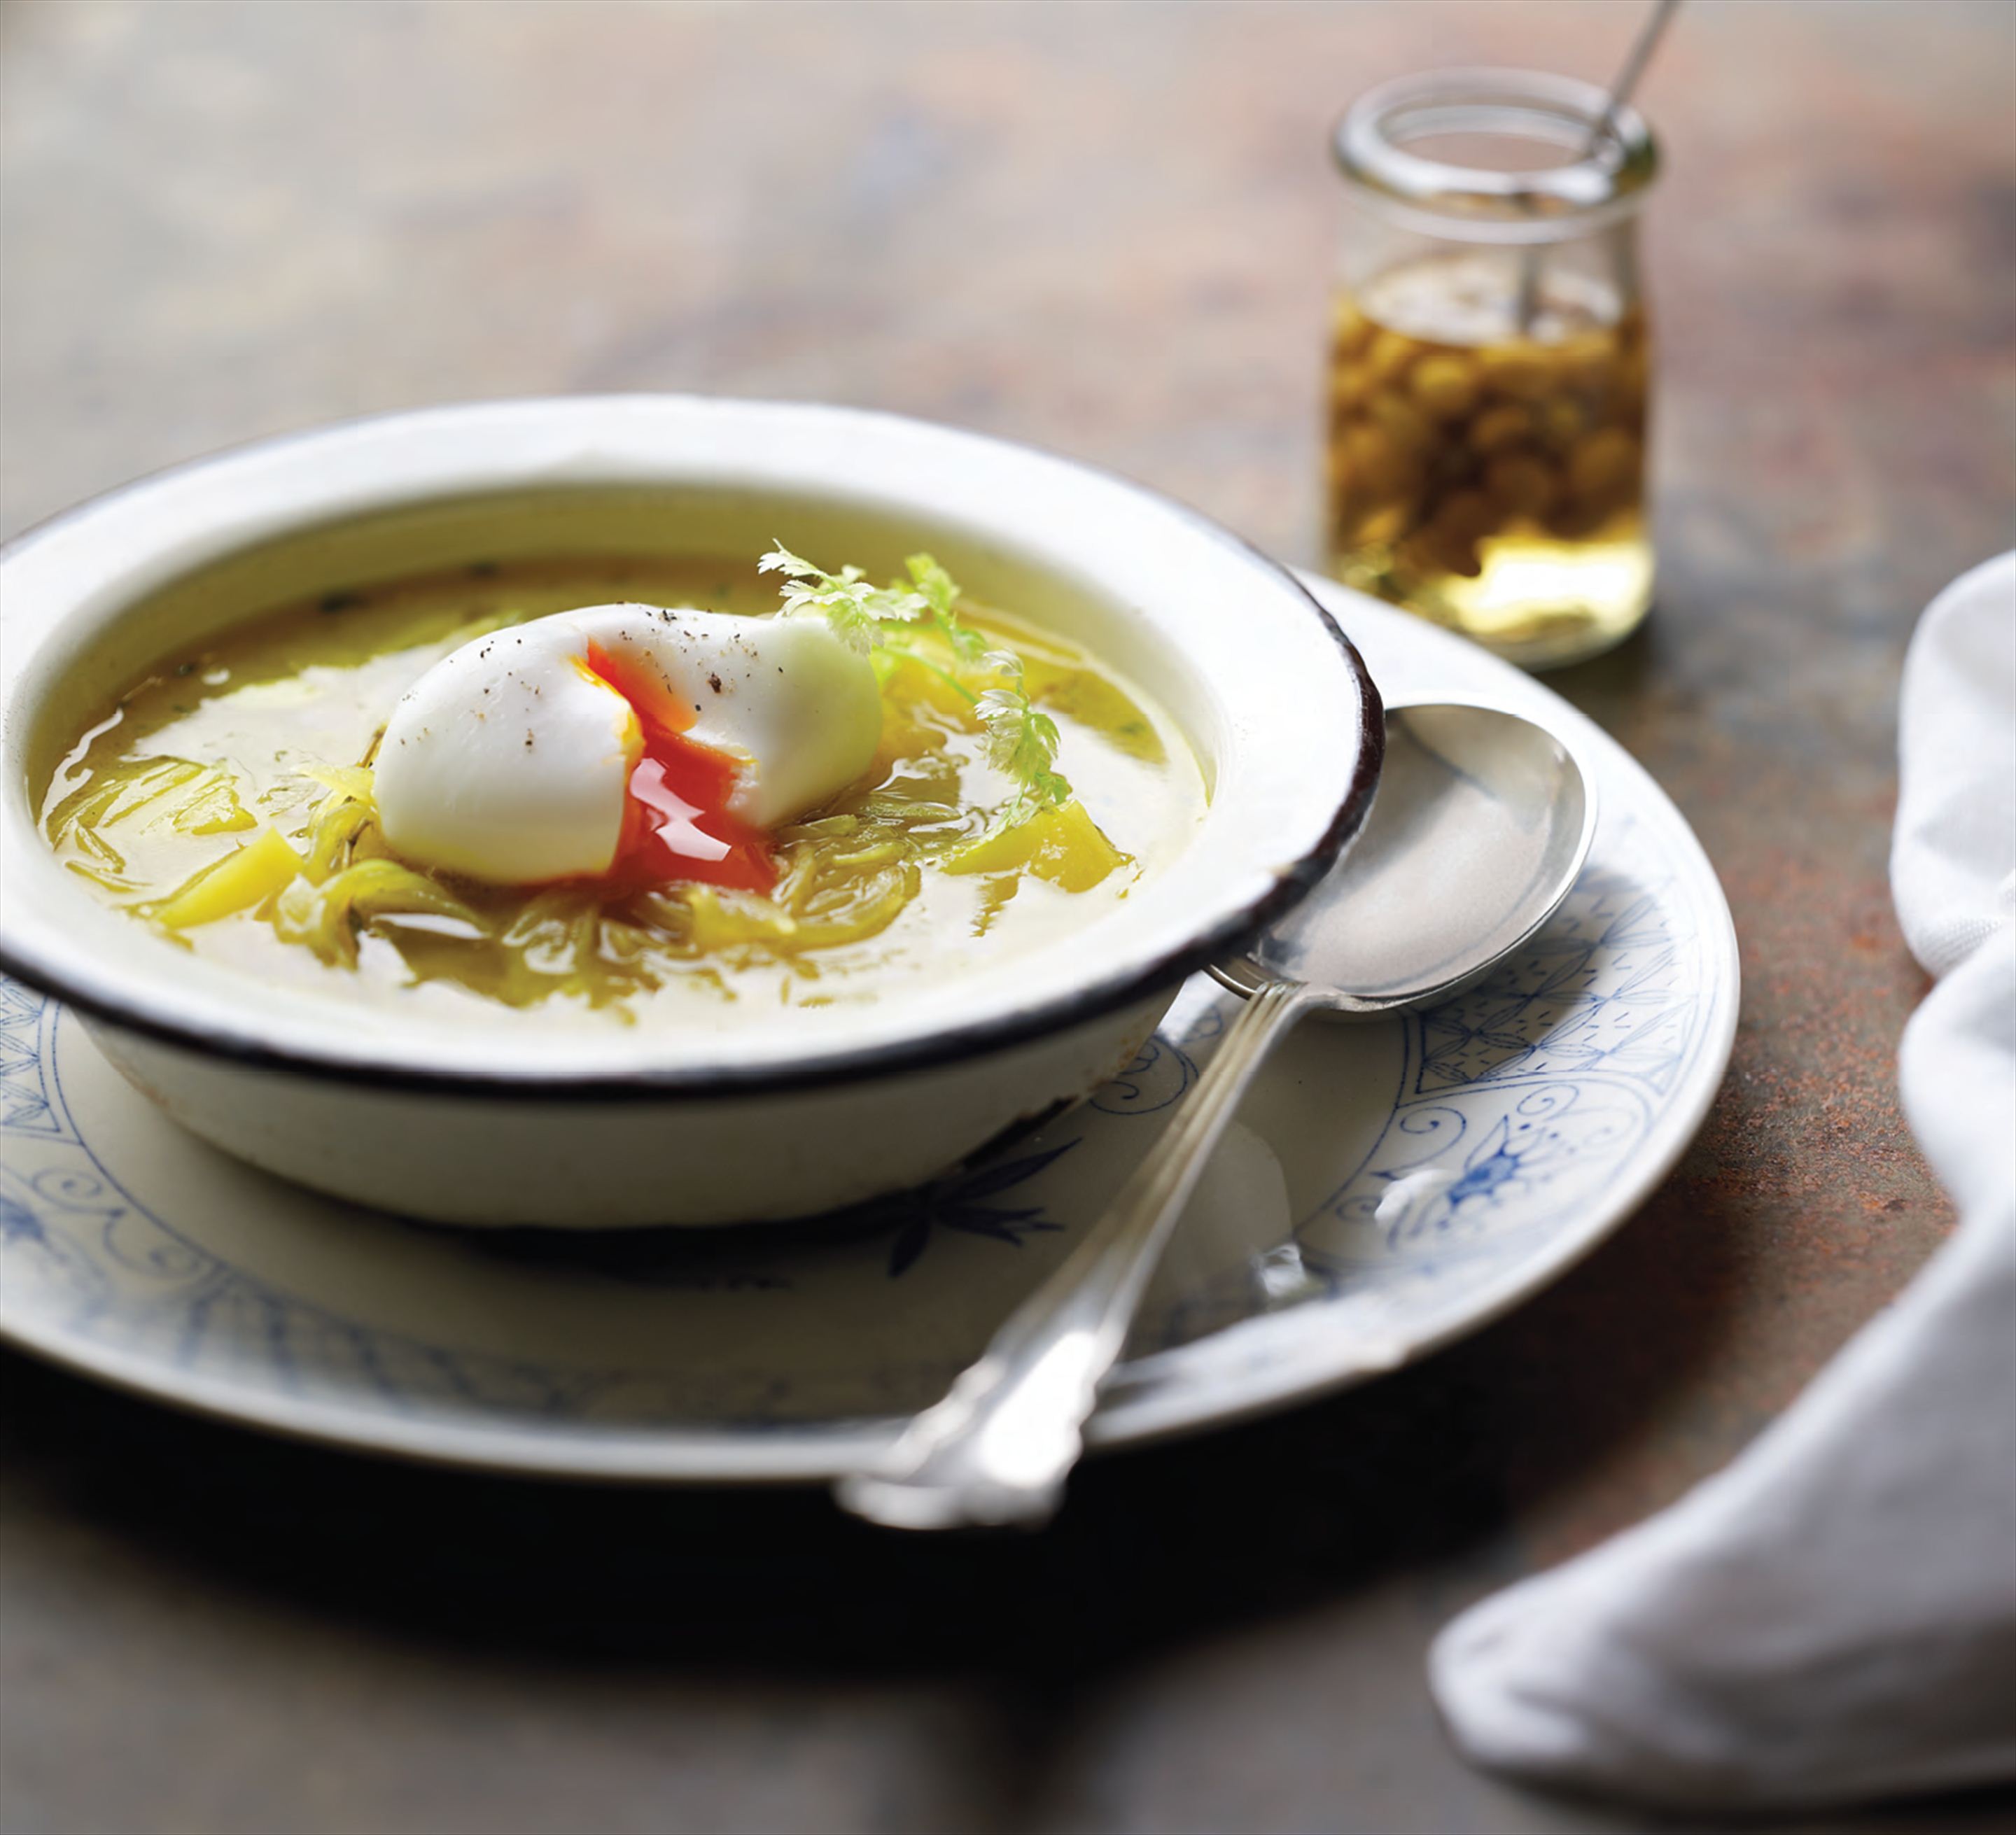 Persepolis onion soup with soft-poached eggs